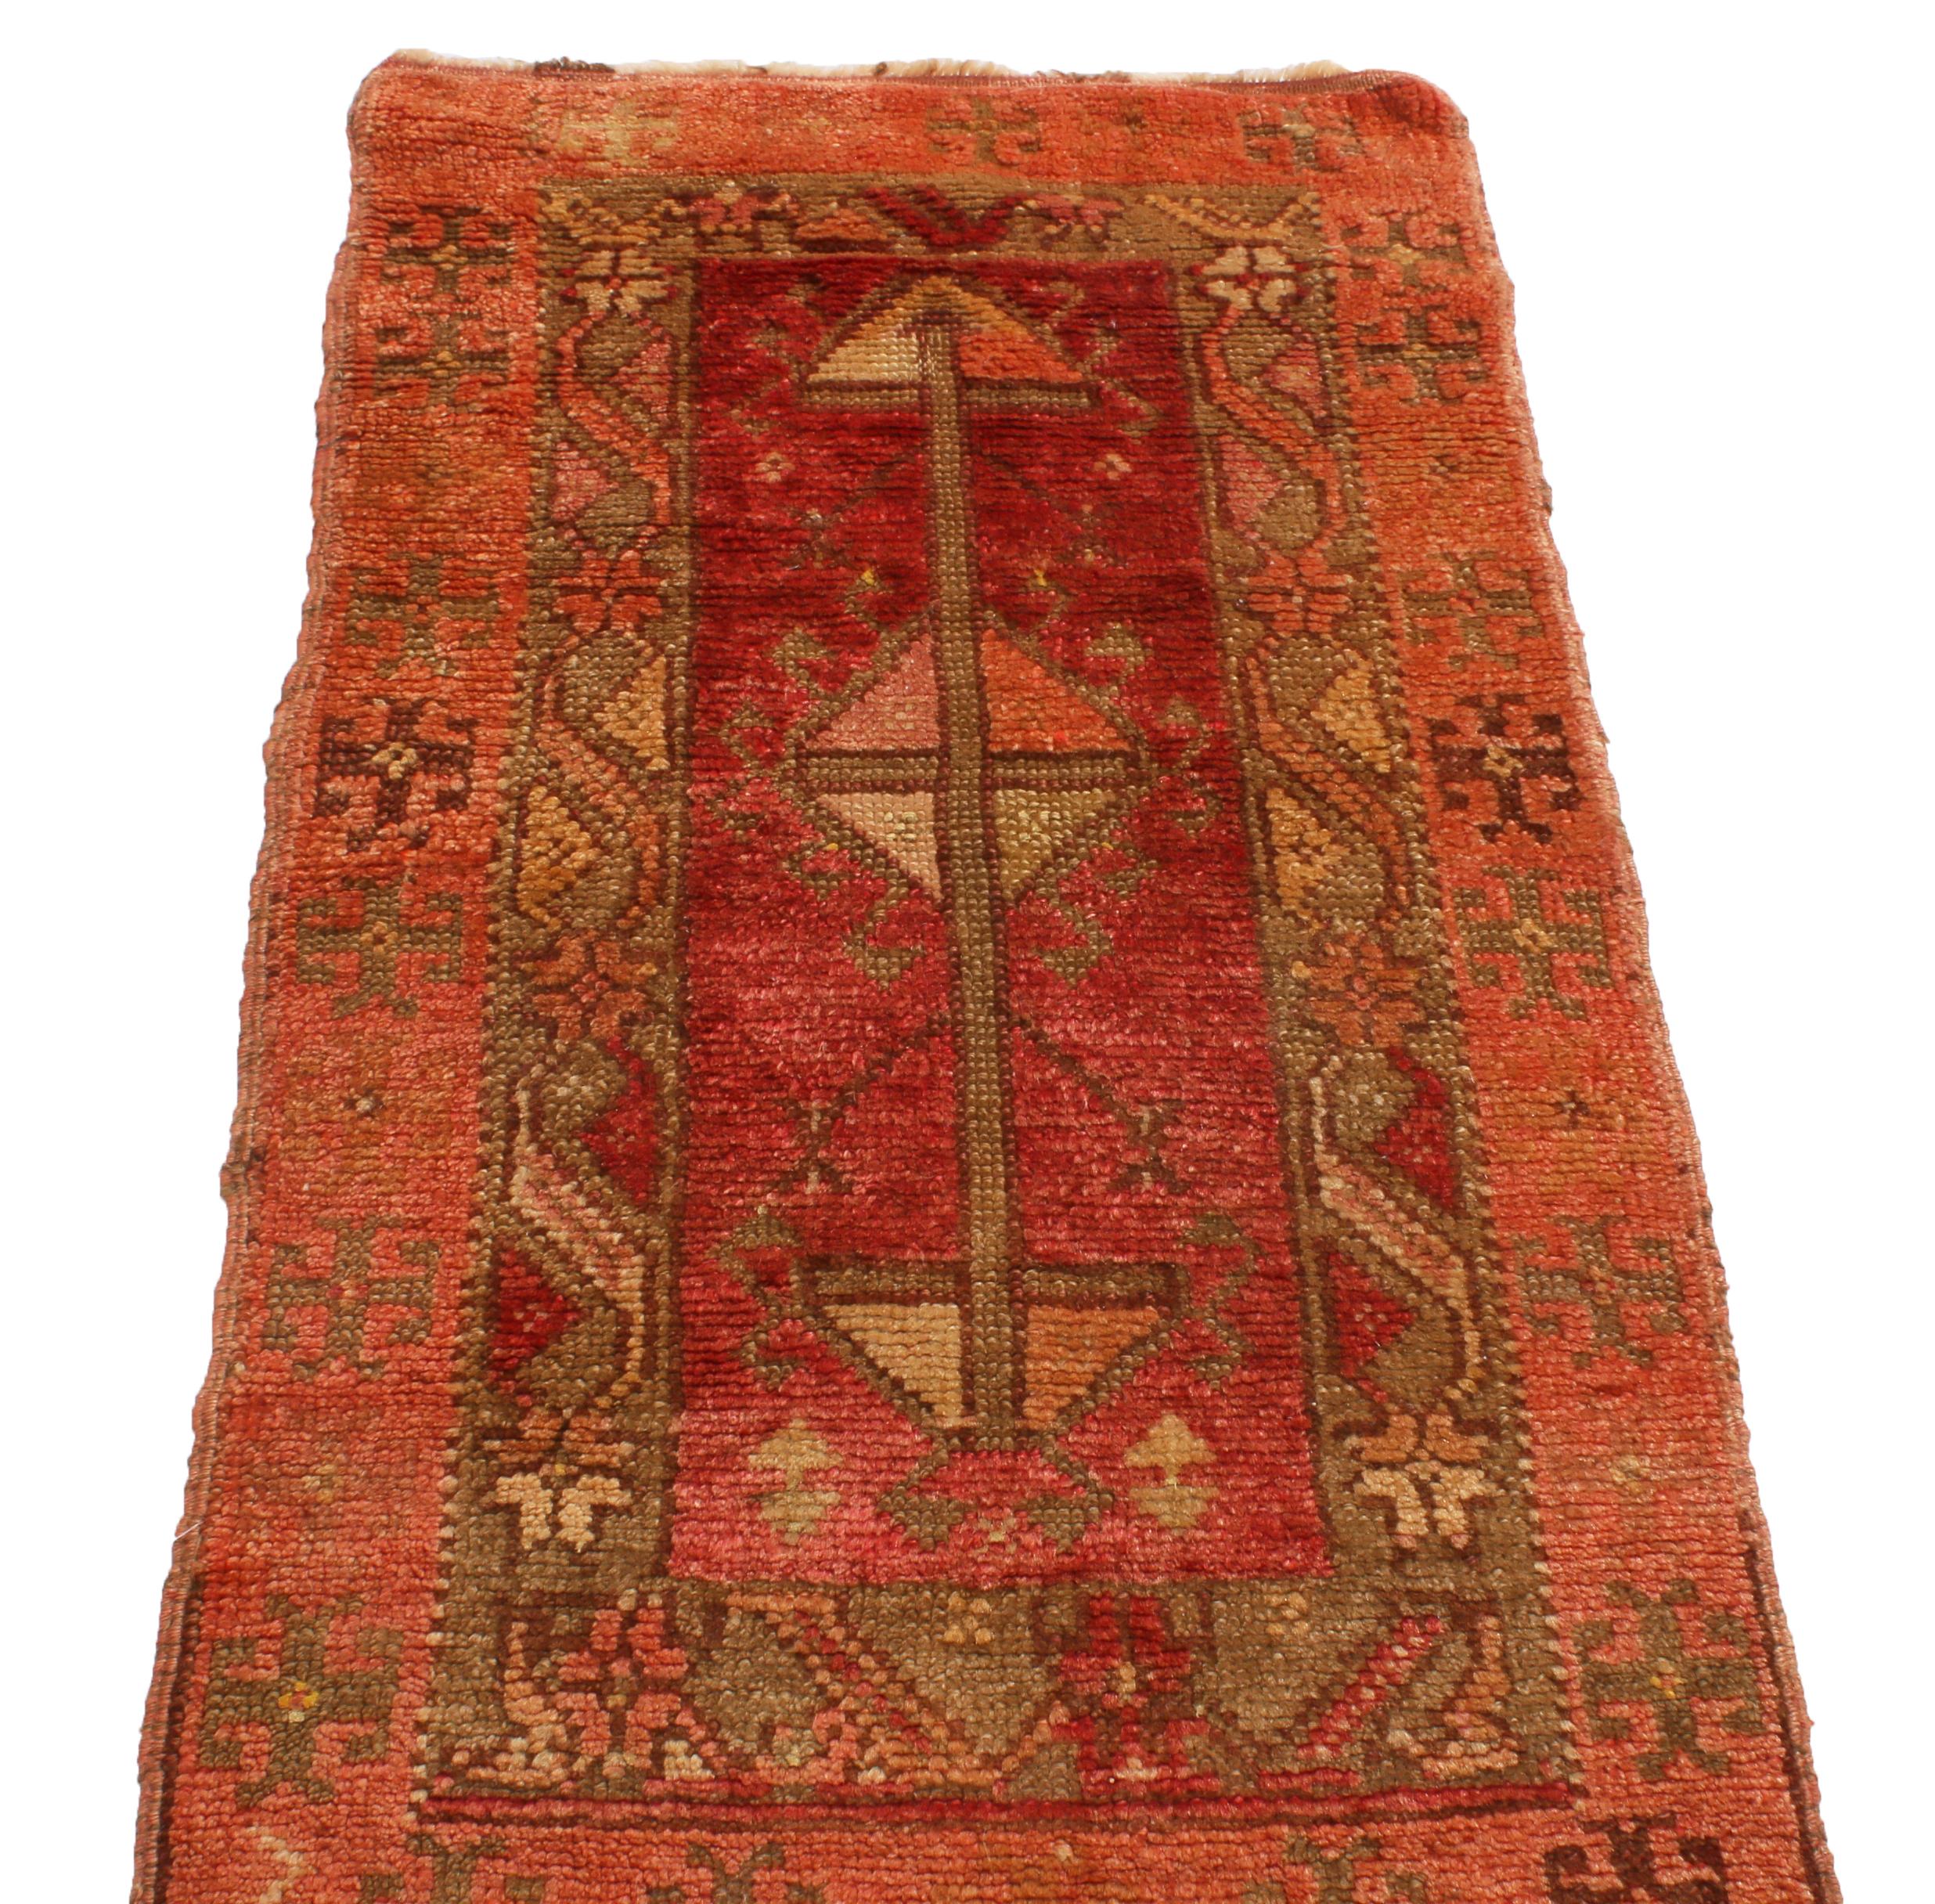 Originating from Turkey in 1910, this antique Oushak wool rug is hand knotted with a geometric series of symbols resembling oriental ram's horn cross and Bukagi fetter motifs. Enjoying an intriguing combination of meandering borders around a